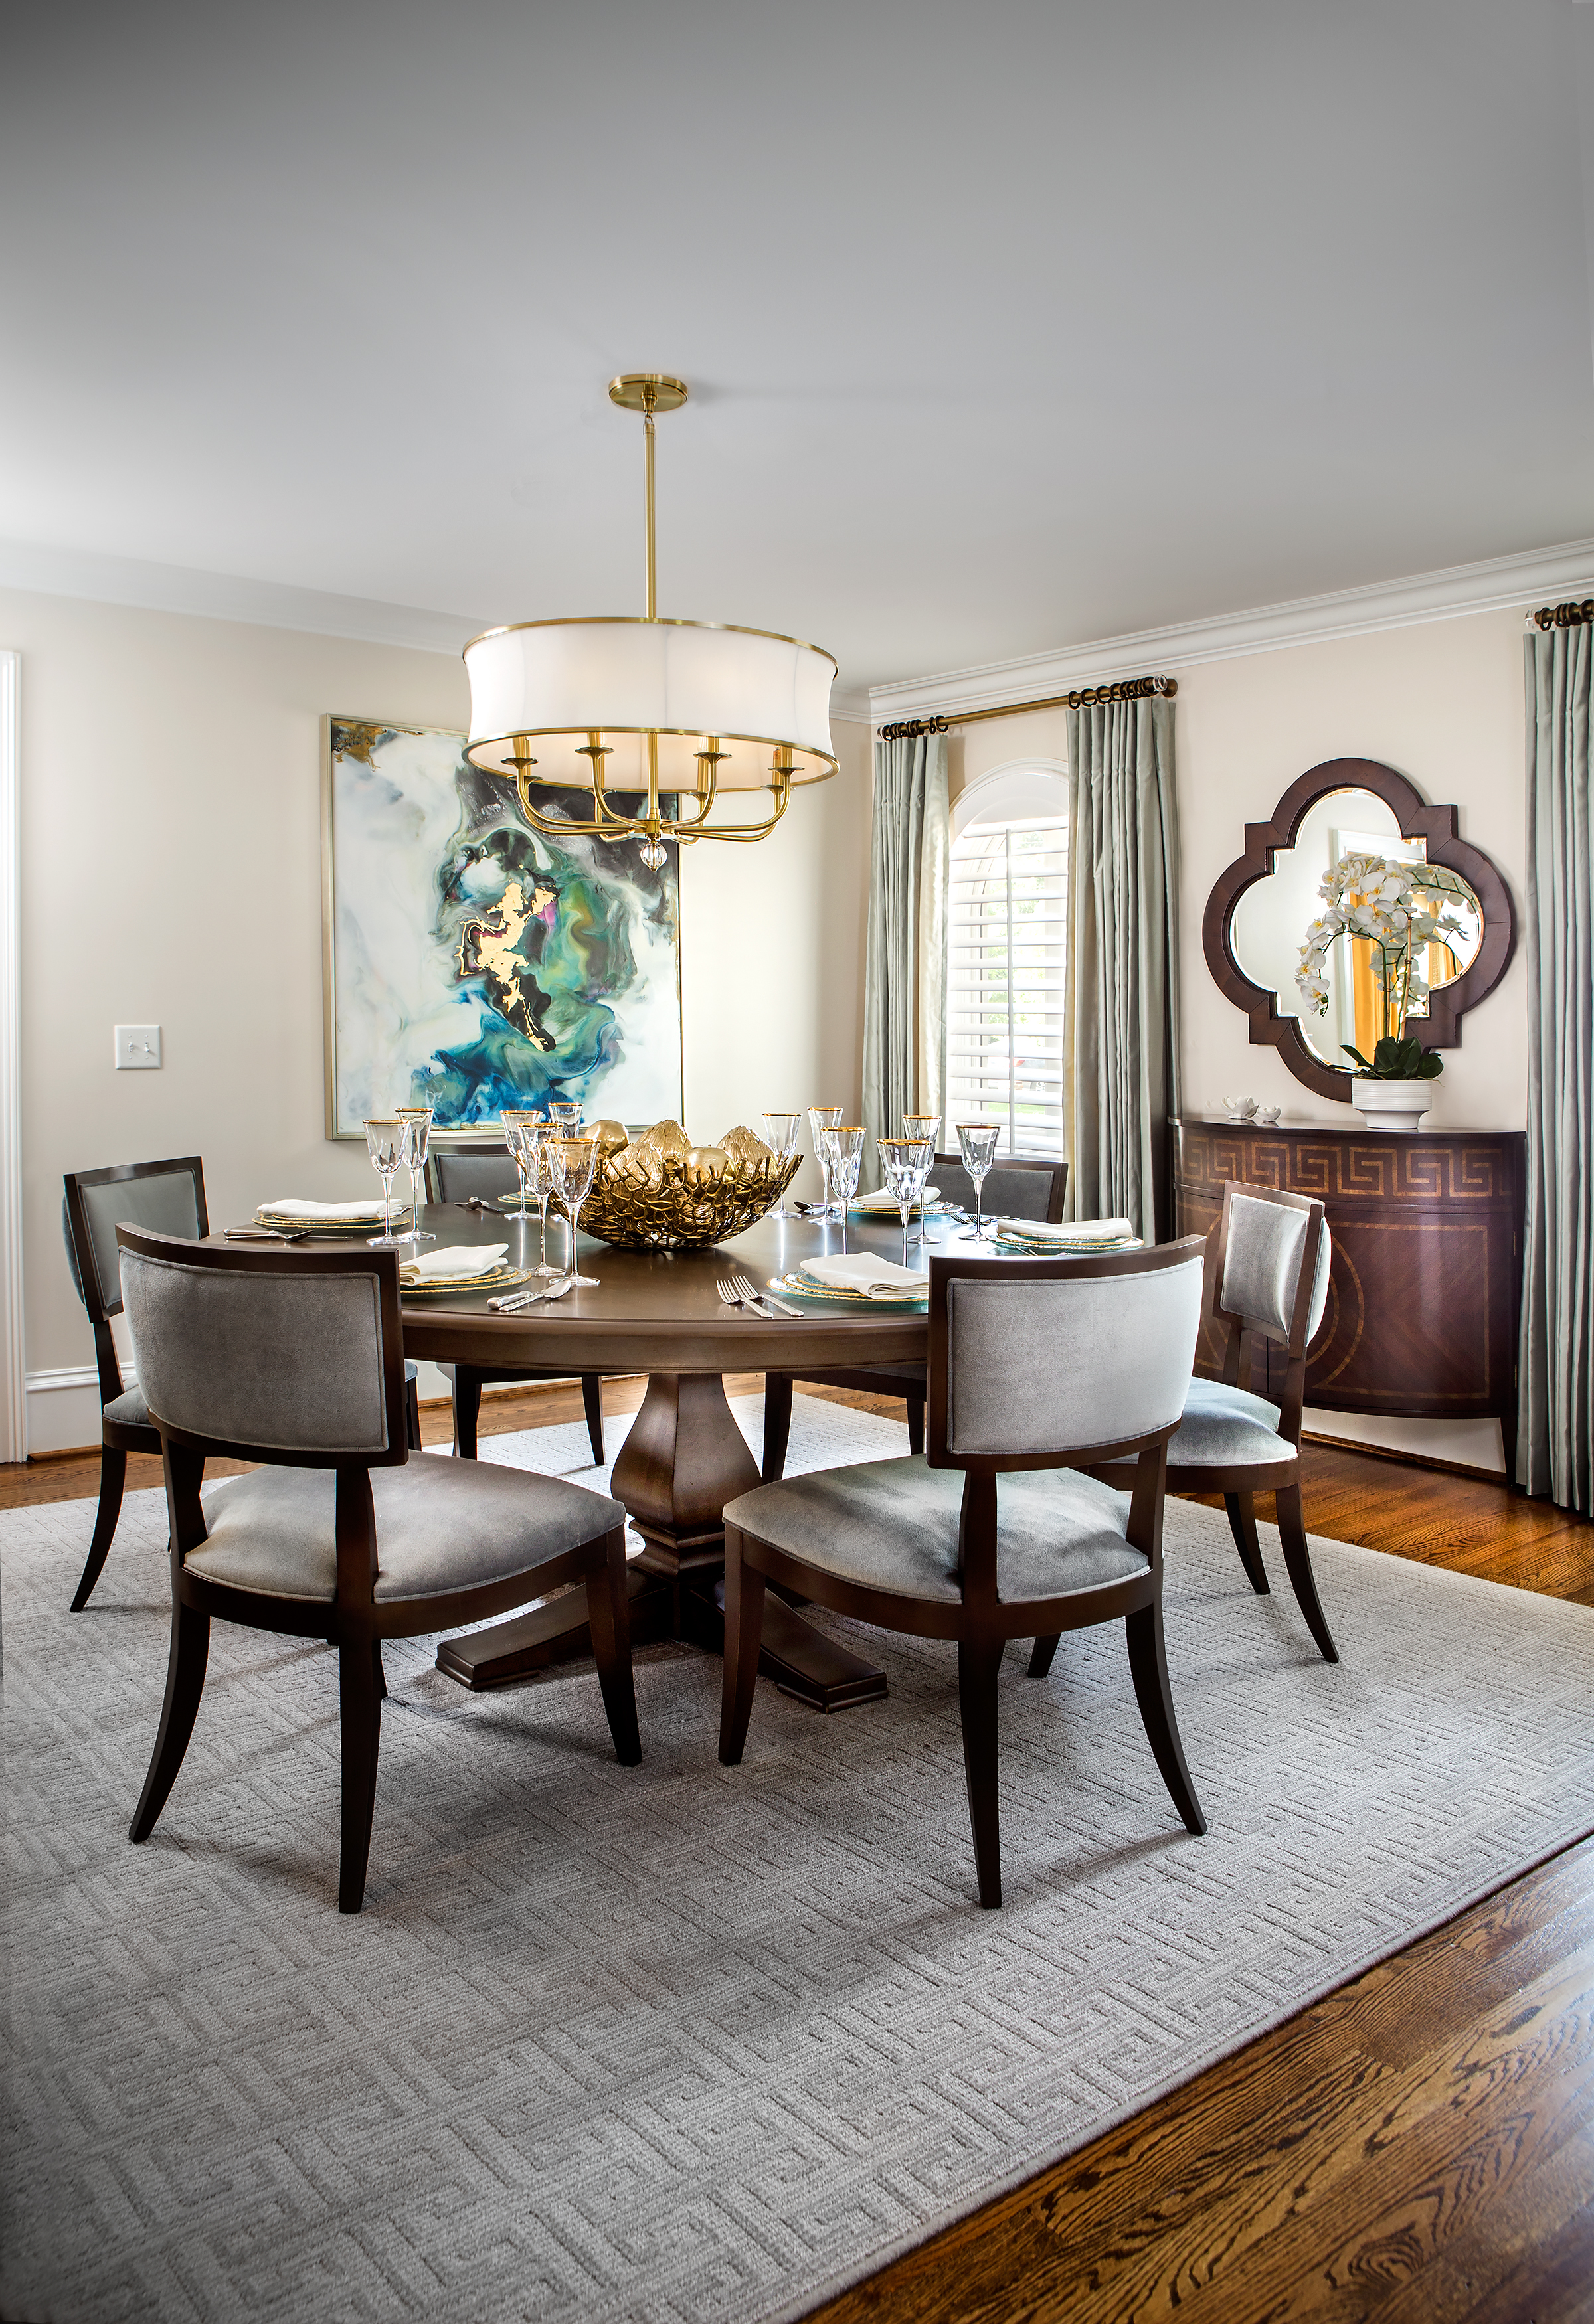 Terri Veitinger of Ethan Allen designed the dining room with understated elegance, inviting guests to “come in and sit down.” The 72-inch round dining table is perfection for the space, resting on a square rug.